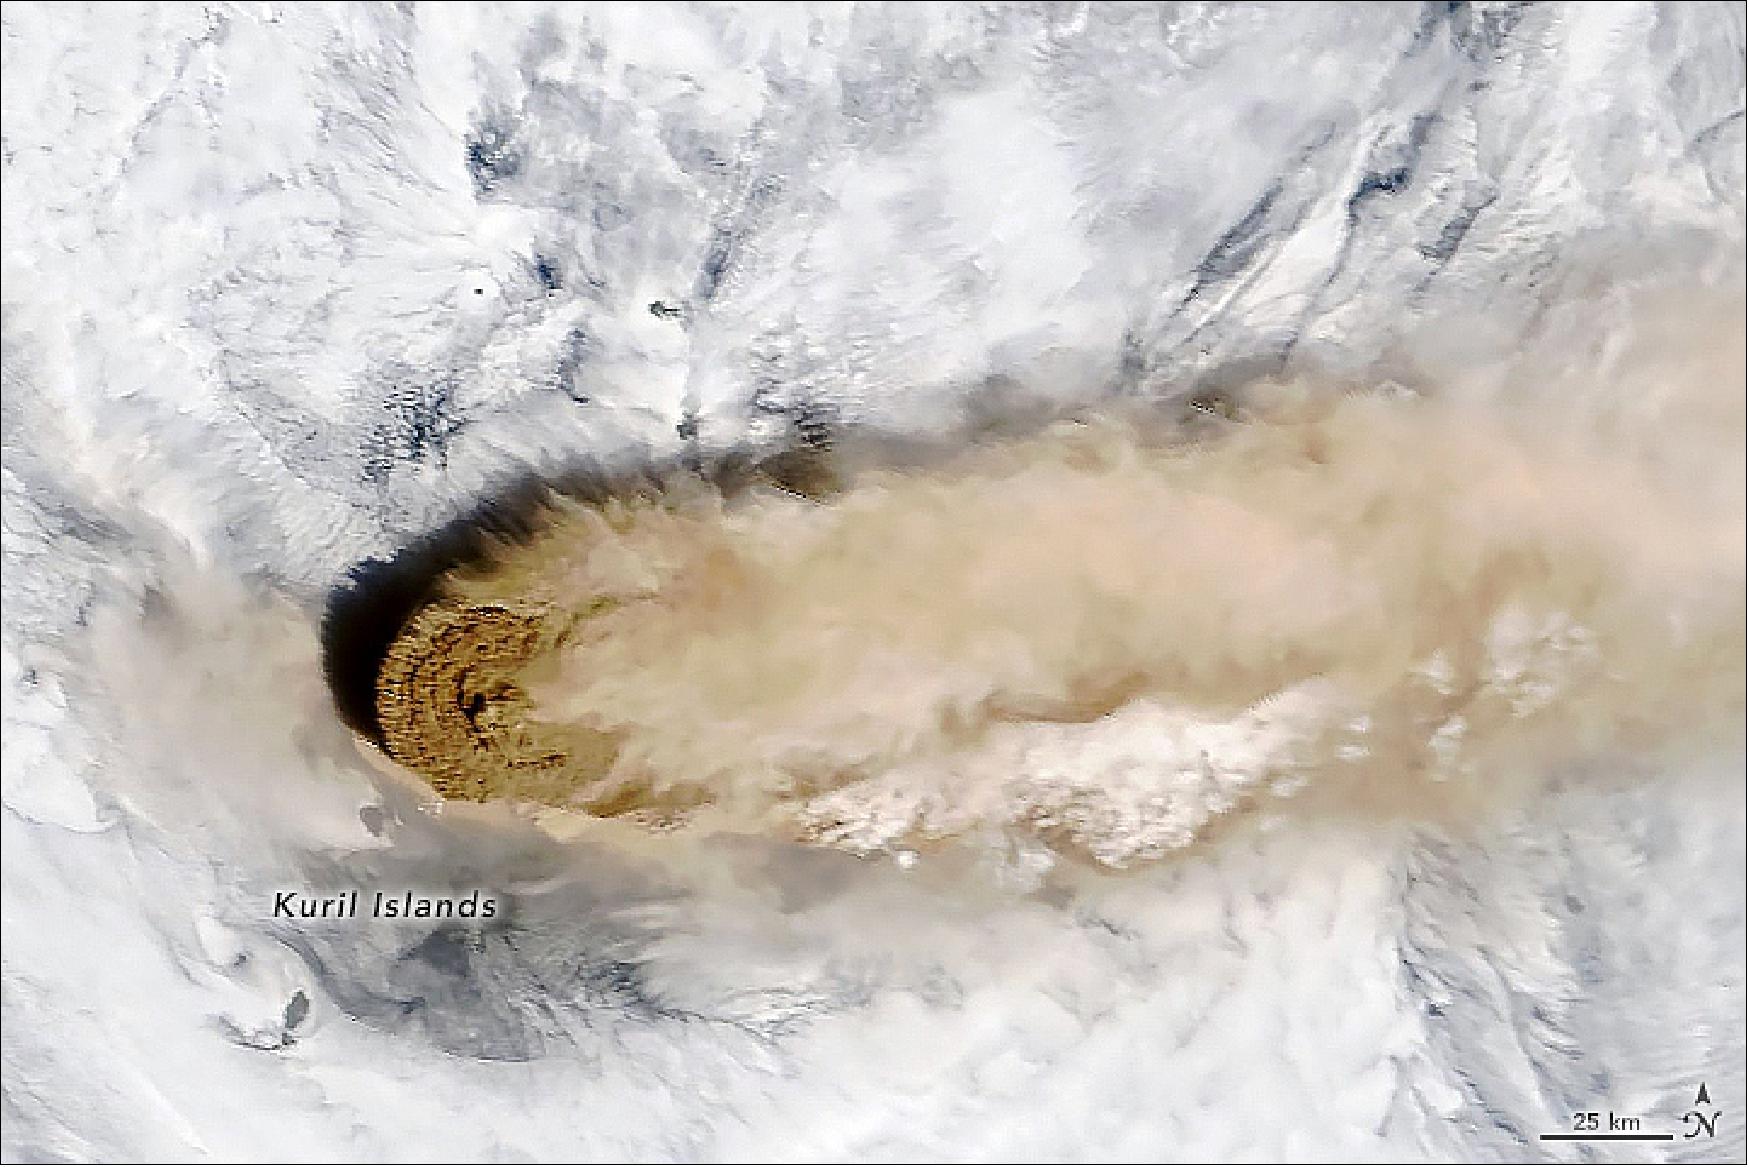 Figure 29: The MODIS instrument on NASA’s Terra satellite acquired this image on the morning of 22 June. At the time, the most concentrated ash was on the western edge of the plume, above Raikoke. By the next day, just a faint remnant of the ash remained visible to MODIS [image credit: NASA Earth Observatory, image by Joshua Stevens using MODIS data from NASA EOSDIS/LANCE and GIBS/Worldview, Story by Adam Voiland, with information from Erik Klemetti (Denison University), Simon Carn (Michigan Tech), and Andrew Prata (Barcelona Supercomputing Center)]